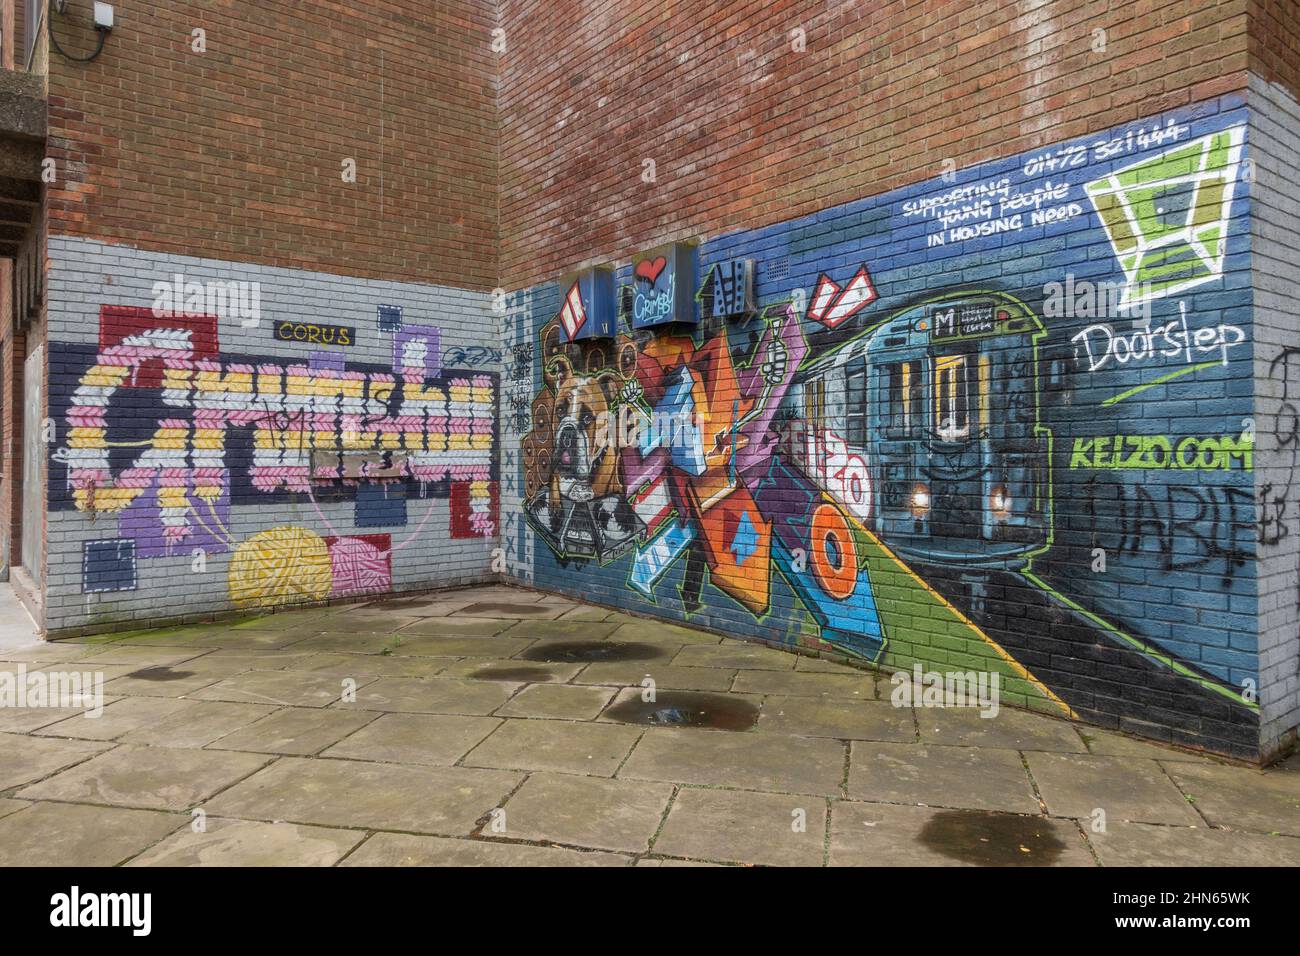 Street art in Grimsby, North East Lincolnshire, UK. Stock Photo